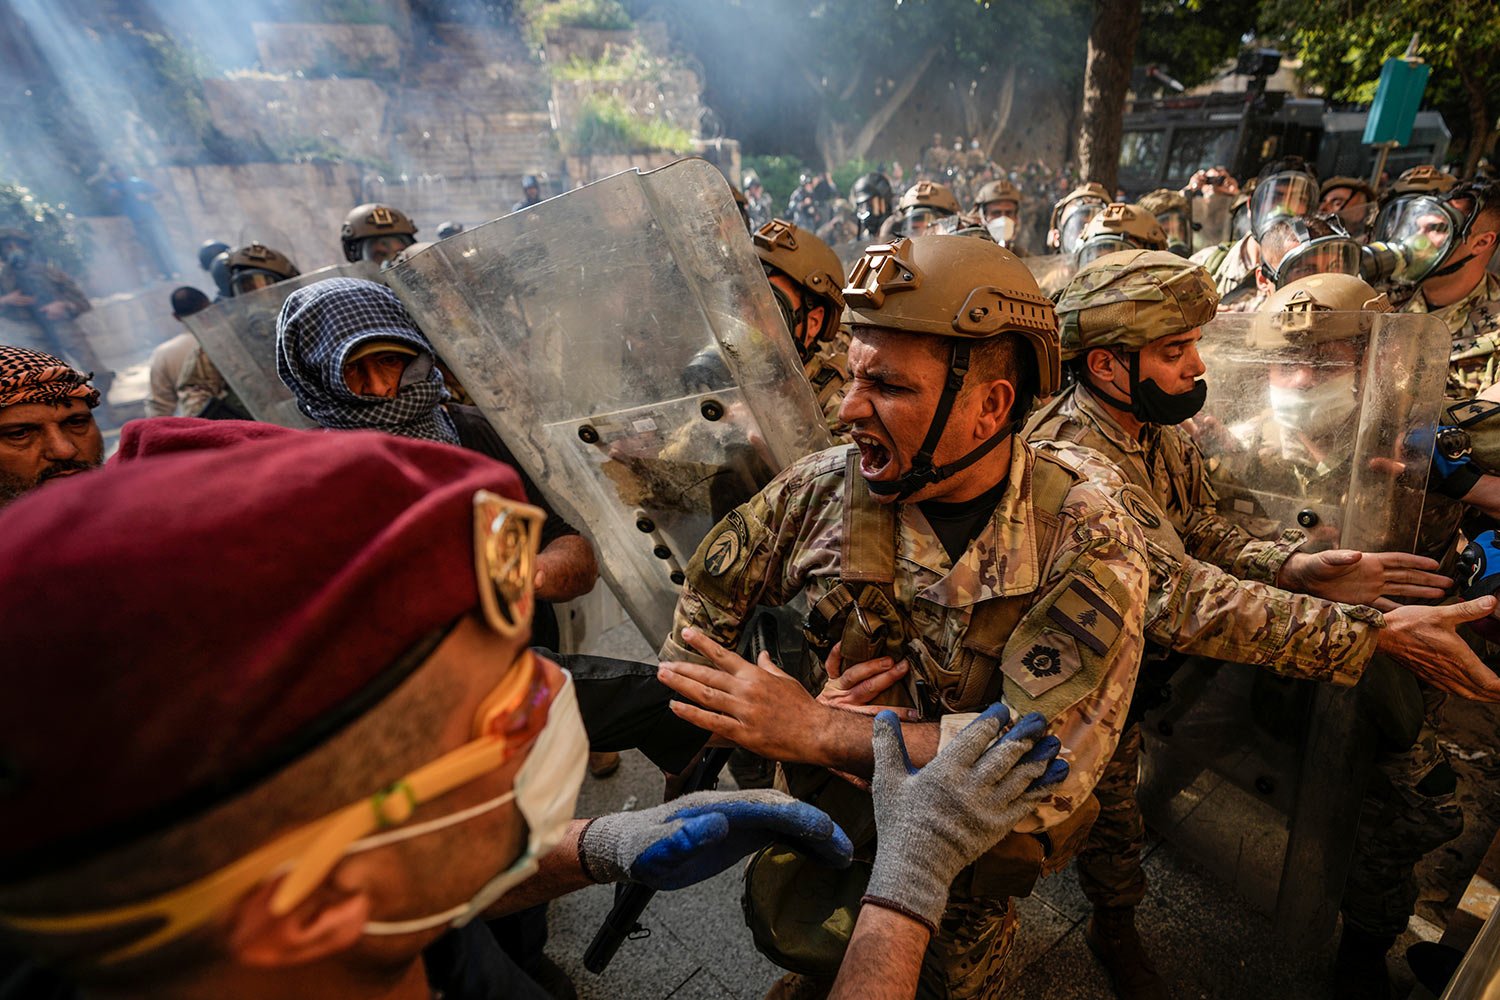  Retired members of the Lebanese security forces and other protesters scuffle with the Lebanese army after they removed a barbed-wire barrier in order to advance towards government buildings during a protest in Beirut, Lebanon, Tuesday, April 18, 202